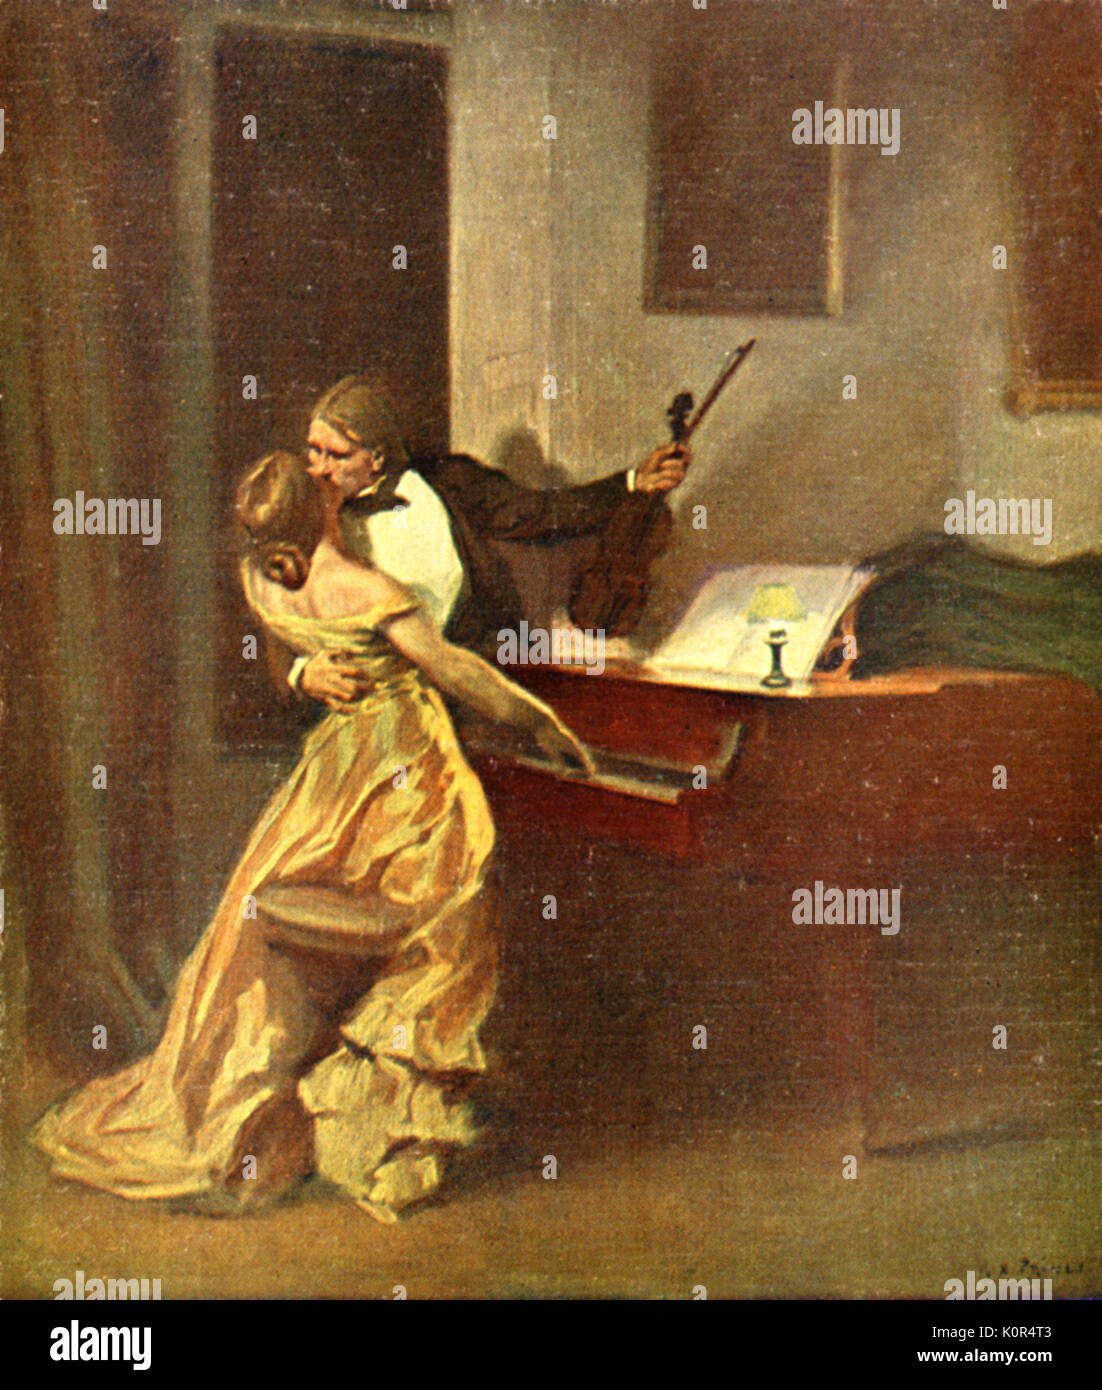 Chamber Music, Violin and Piano 'Kreutzer Sonata'  by R. Prinet.  Painting late 19th century or early 20th century showing man with violin and woman at piano embracing.  (Love and the piano). Beethoven  Ludwig van Beethoven. Stock Photo